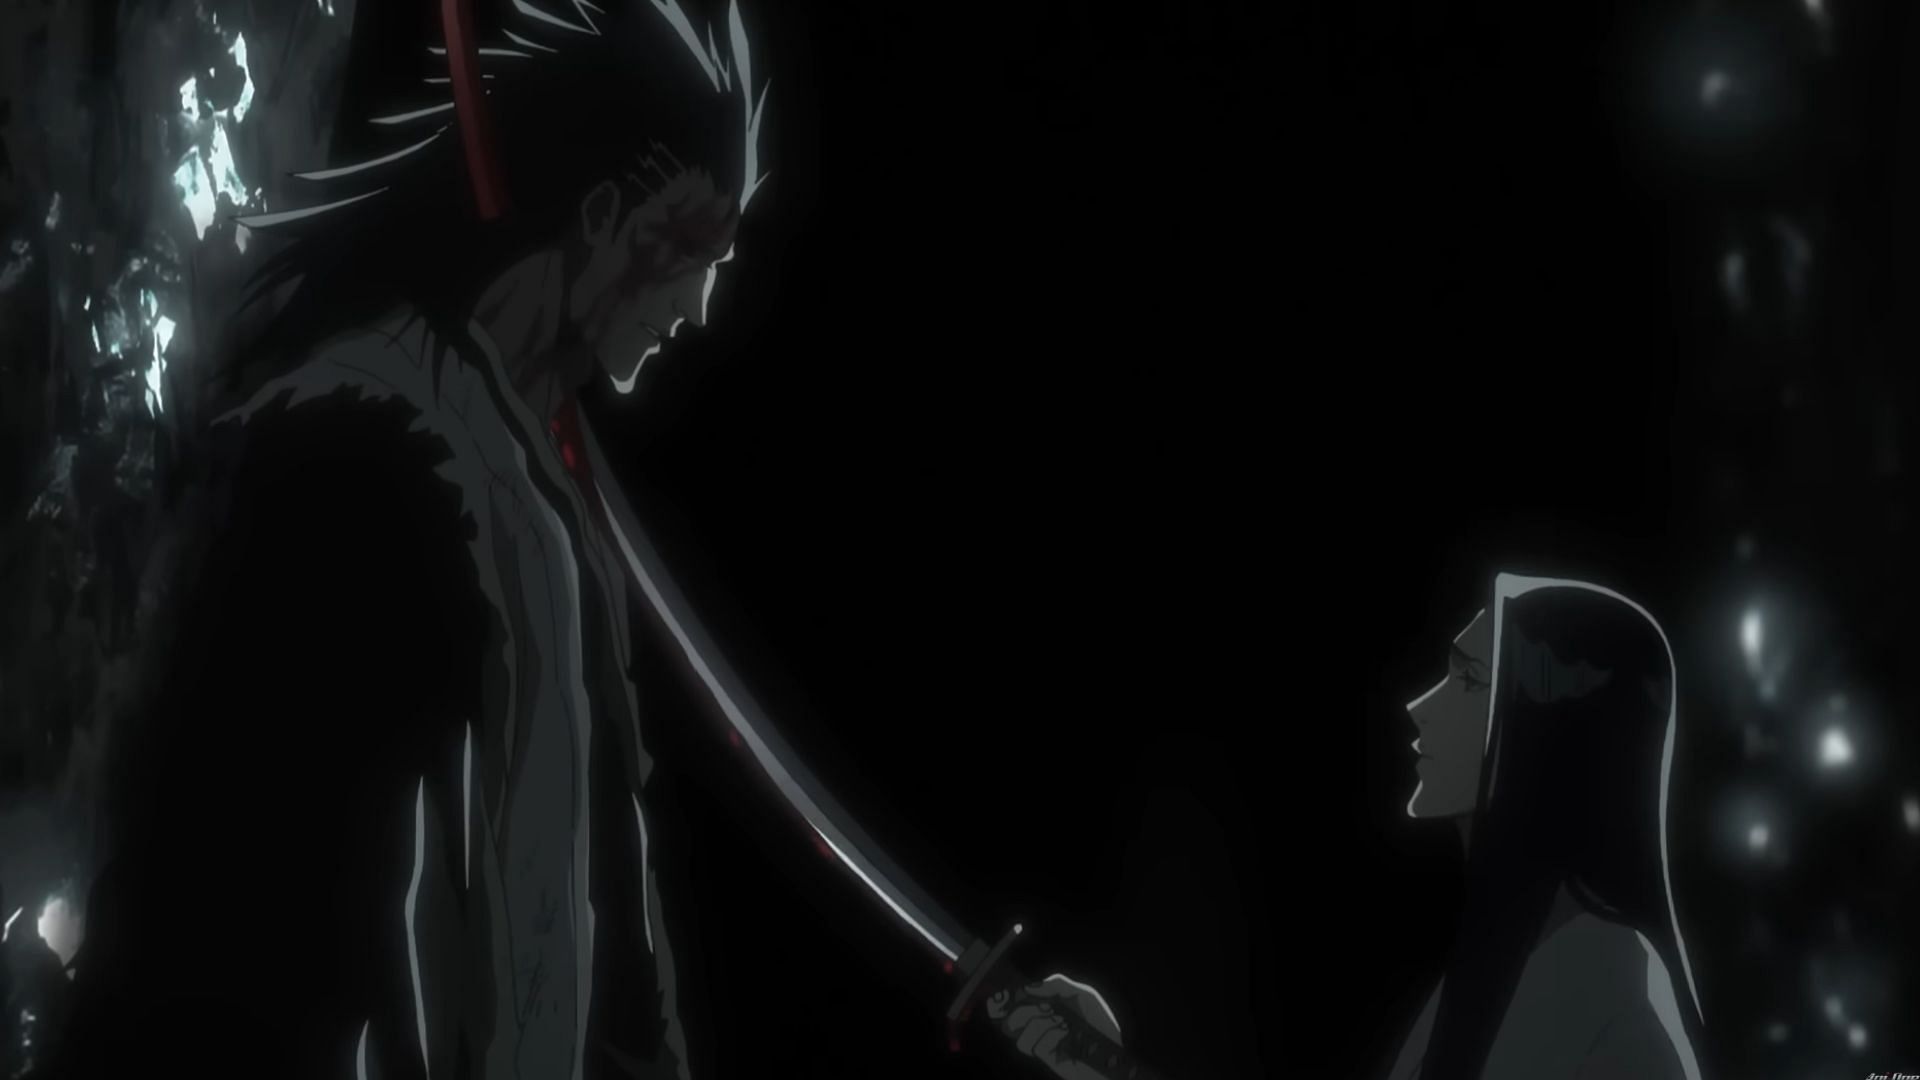 Bleach: Thousand-Year Blood War episode 10: Release date and time